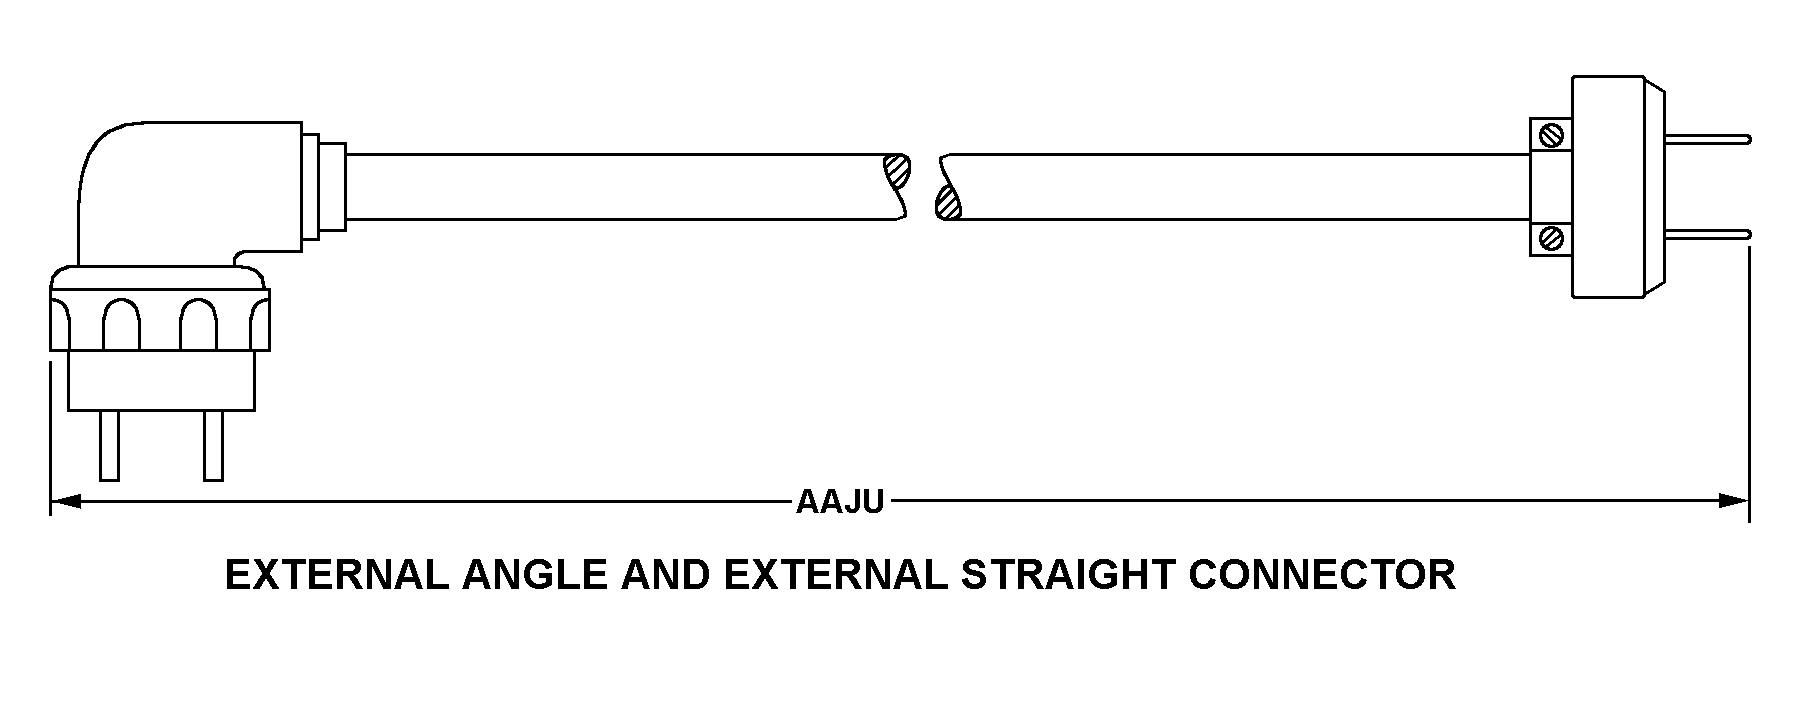 EXTERNAL ANGLE AND EXTERNAL STRAIGHT CONNECTOR style nsn 6150-01-415-5554